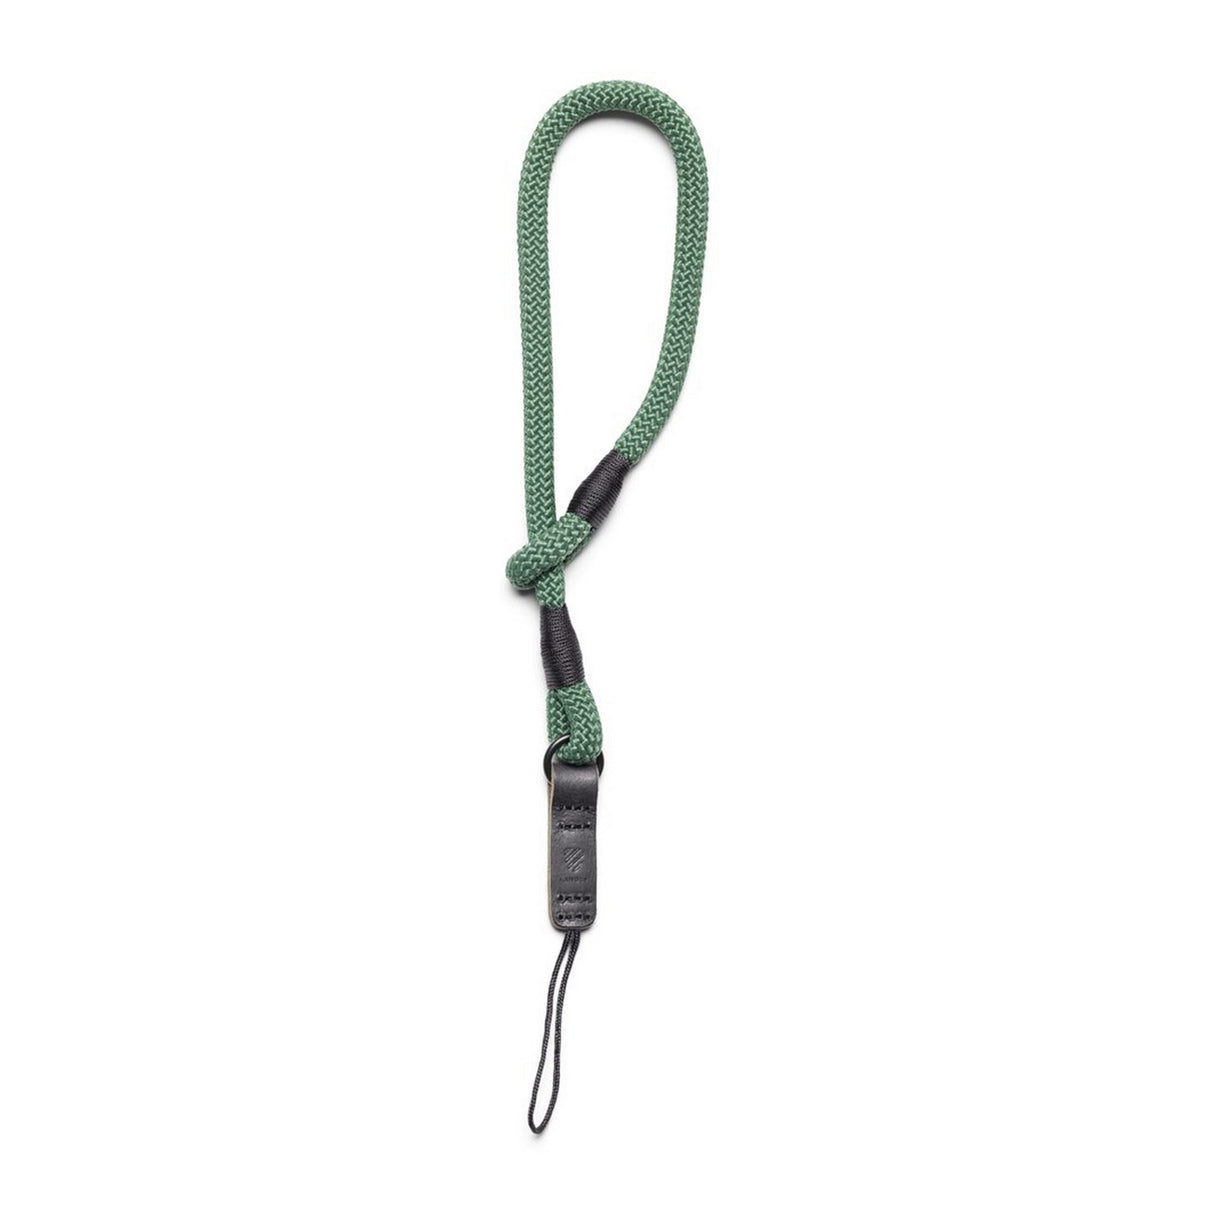 Langly Camera and Phone Wrist Strap, Green